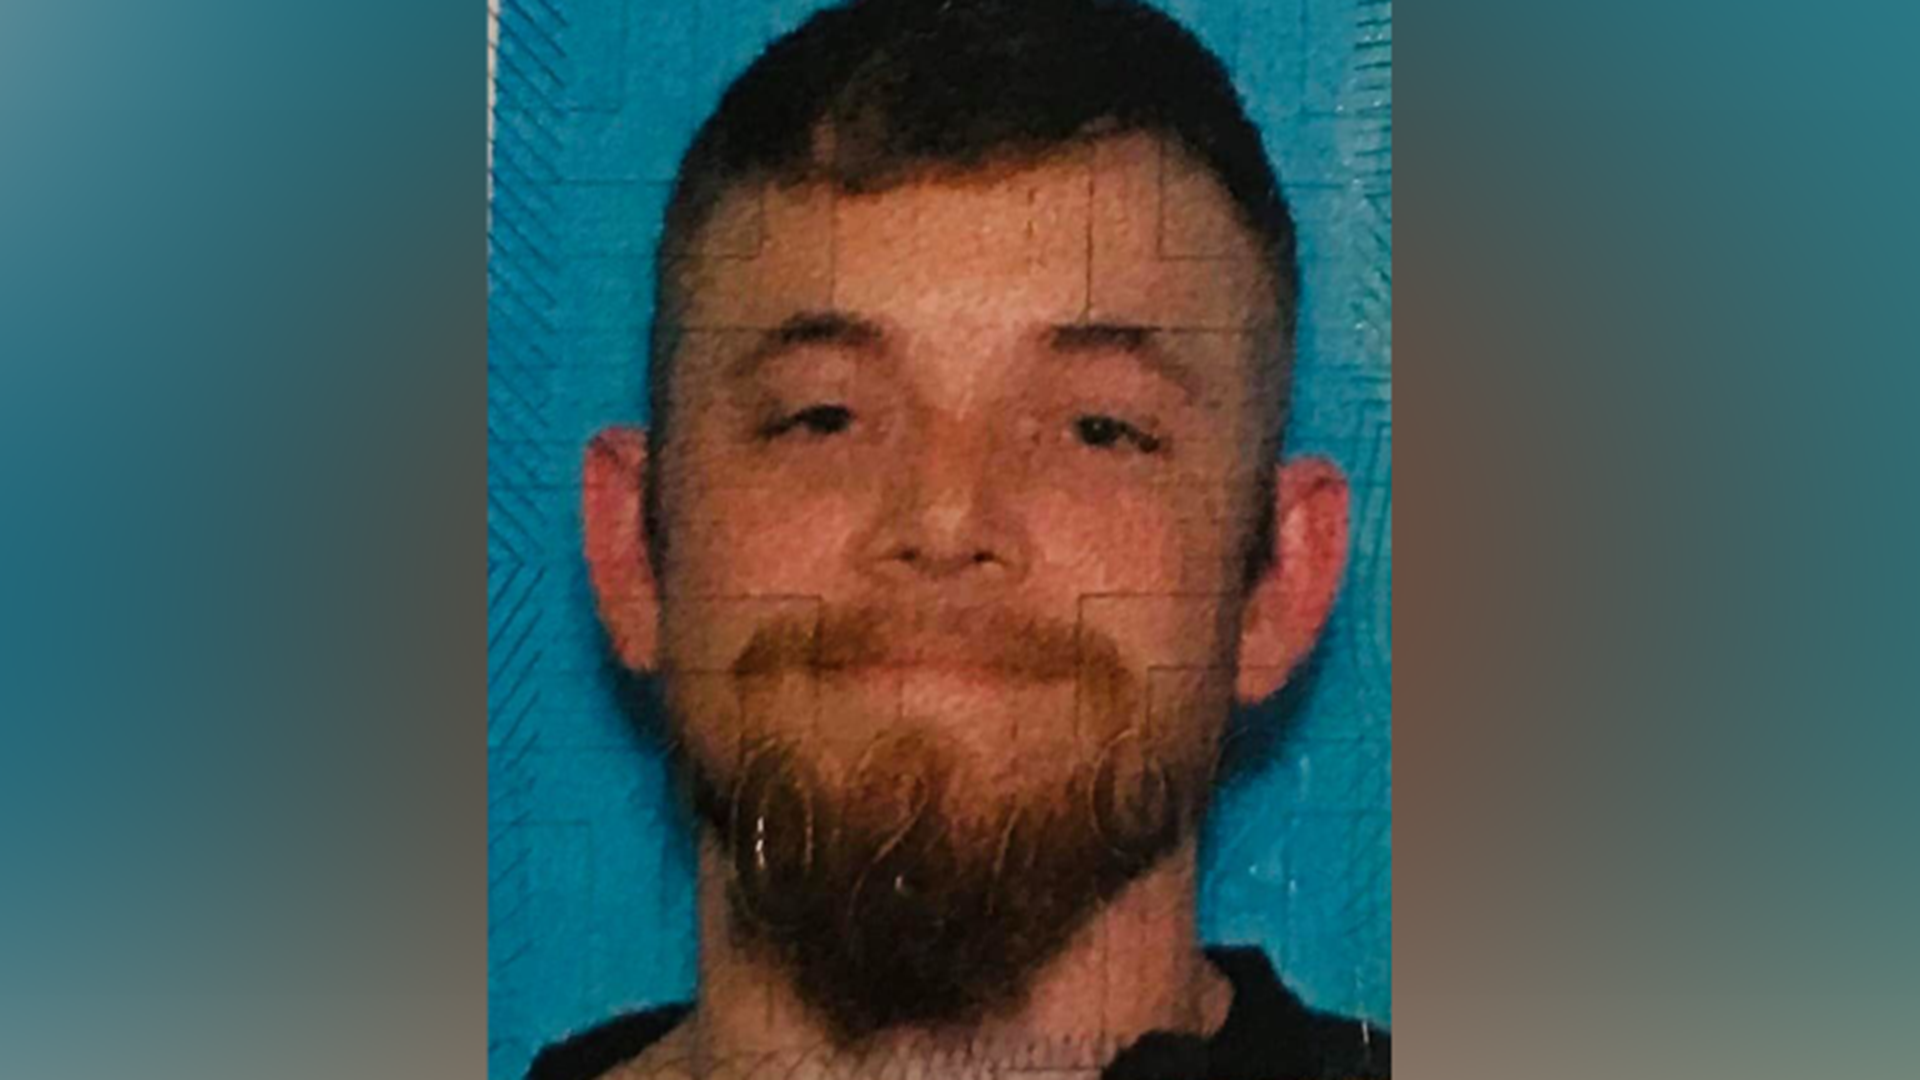 The Franklin County Sheriff’s Office is asking for help locating missing 27-year-old Matthew Potts after his vehicle was found abandoned.